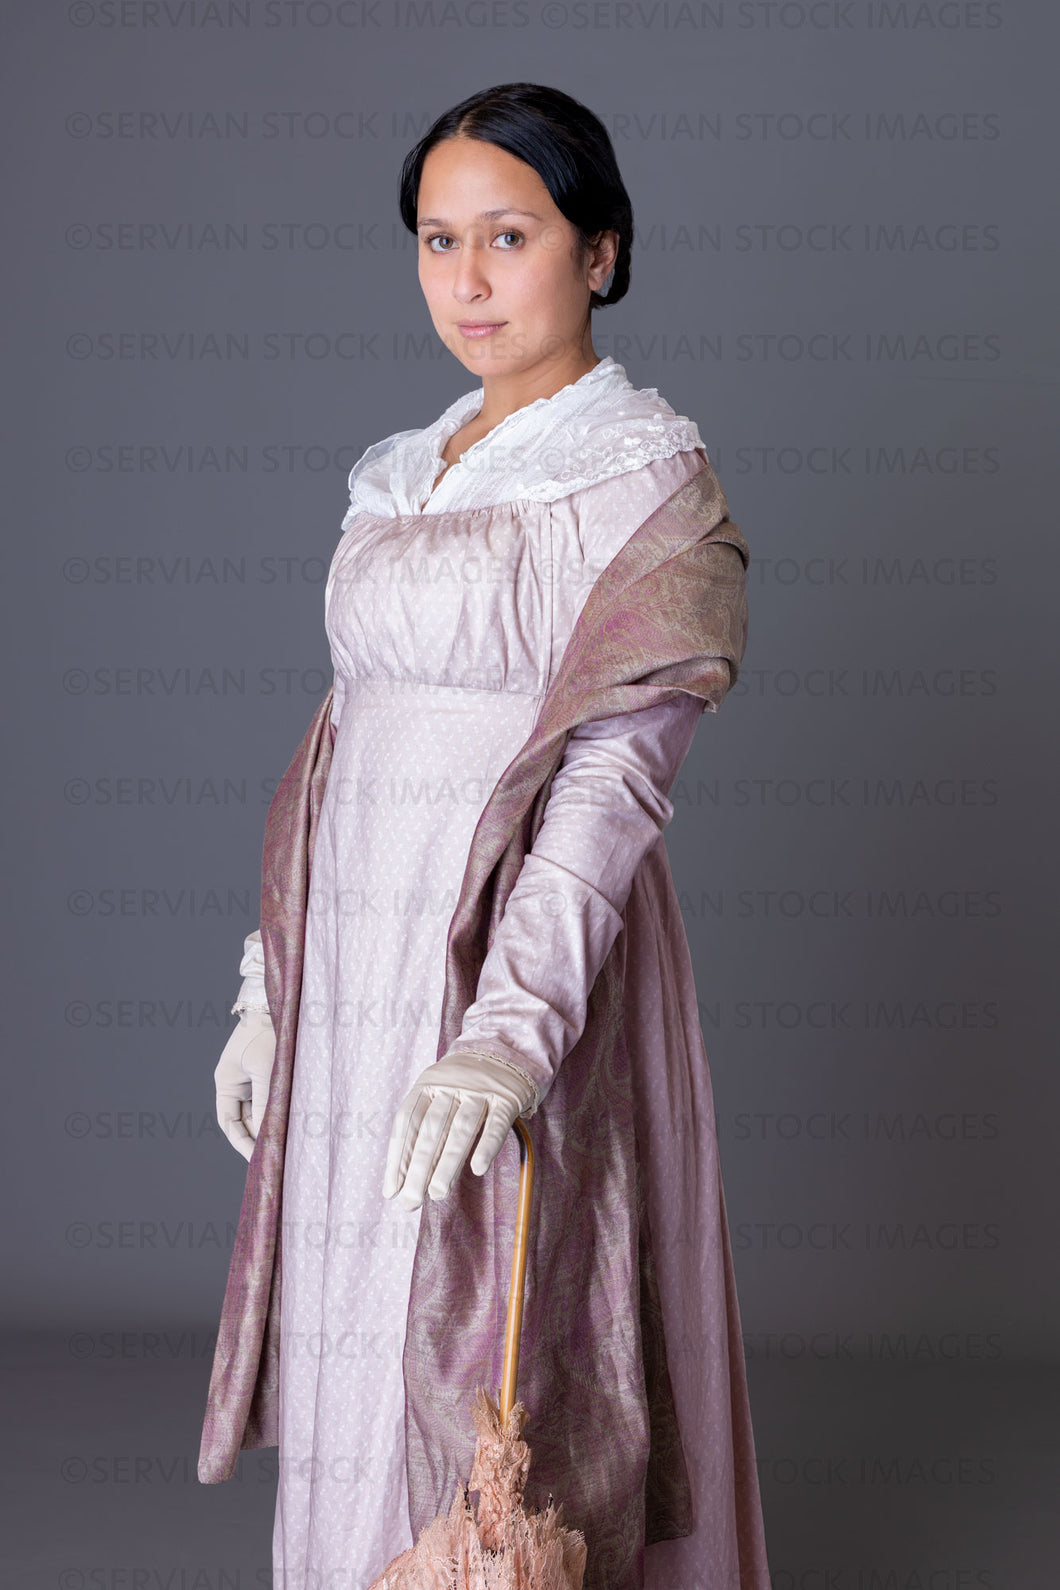 Regency woman wearing a cotton dress with a lace modesty shawl (Sylvia 5918)